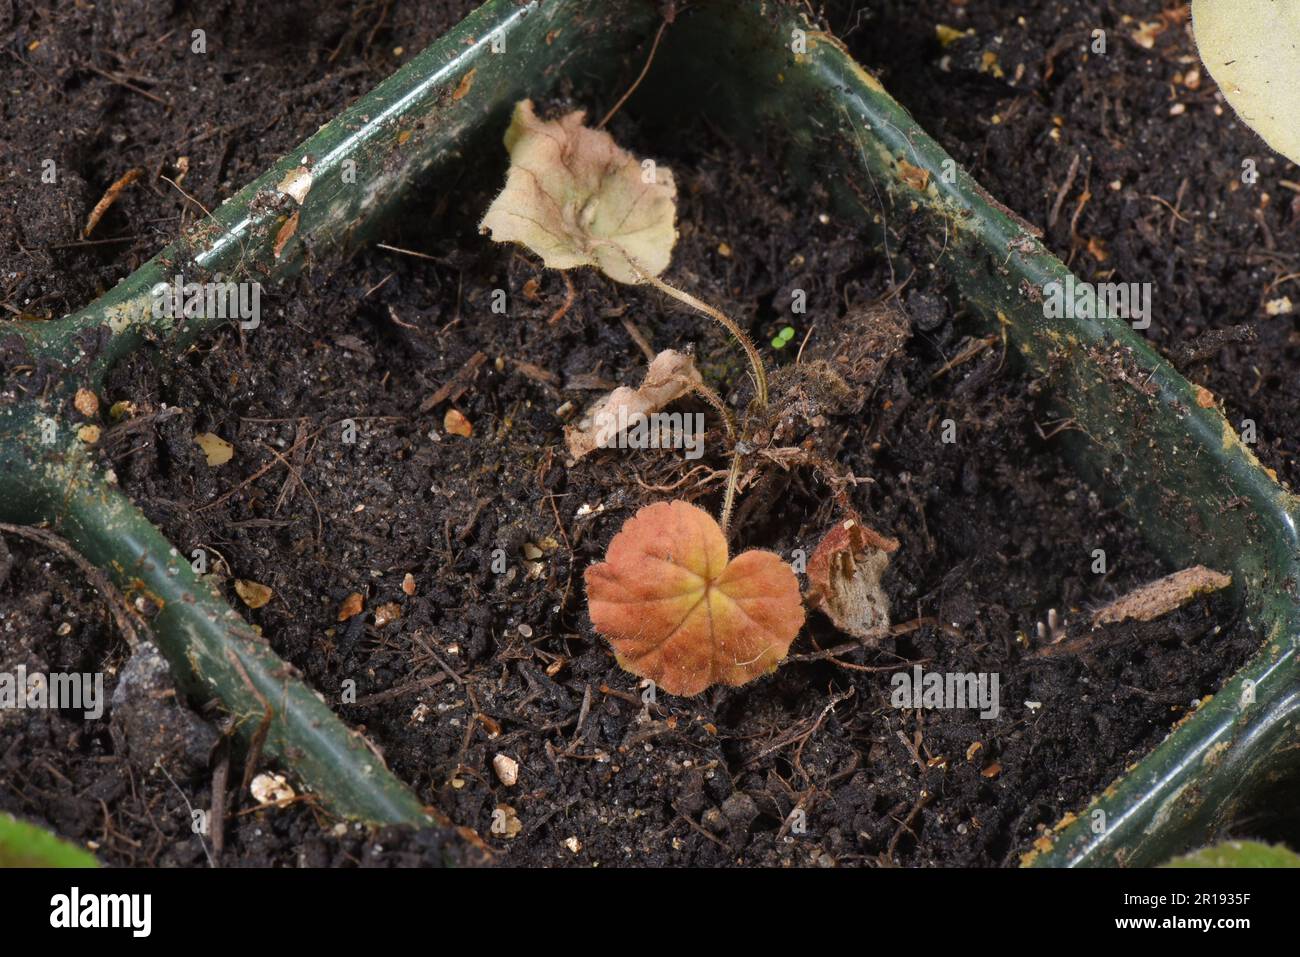 Damping off disease, caused by many possible soil-borne pathogens killing young seedling pelargoniums (Pelargomium zonalis) in seedd cells Stock Photo